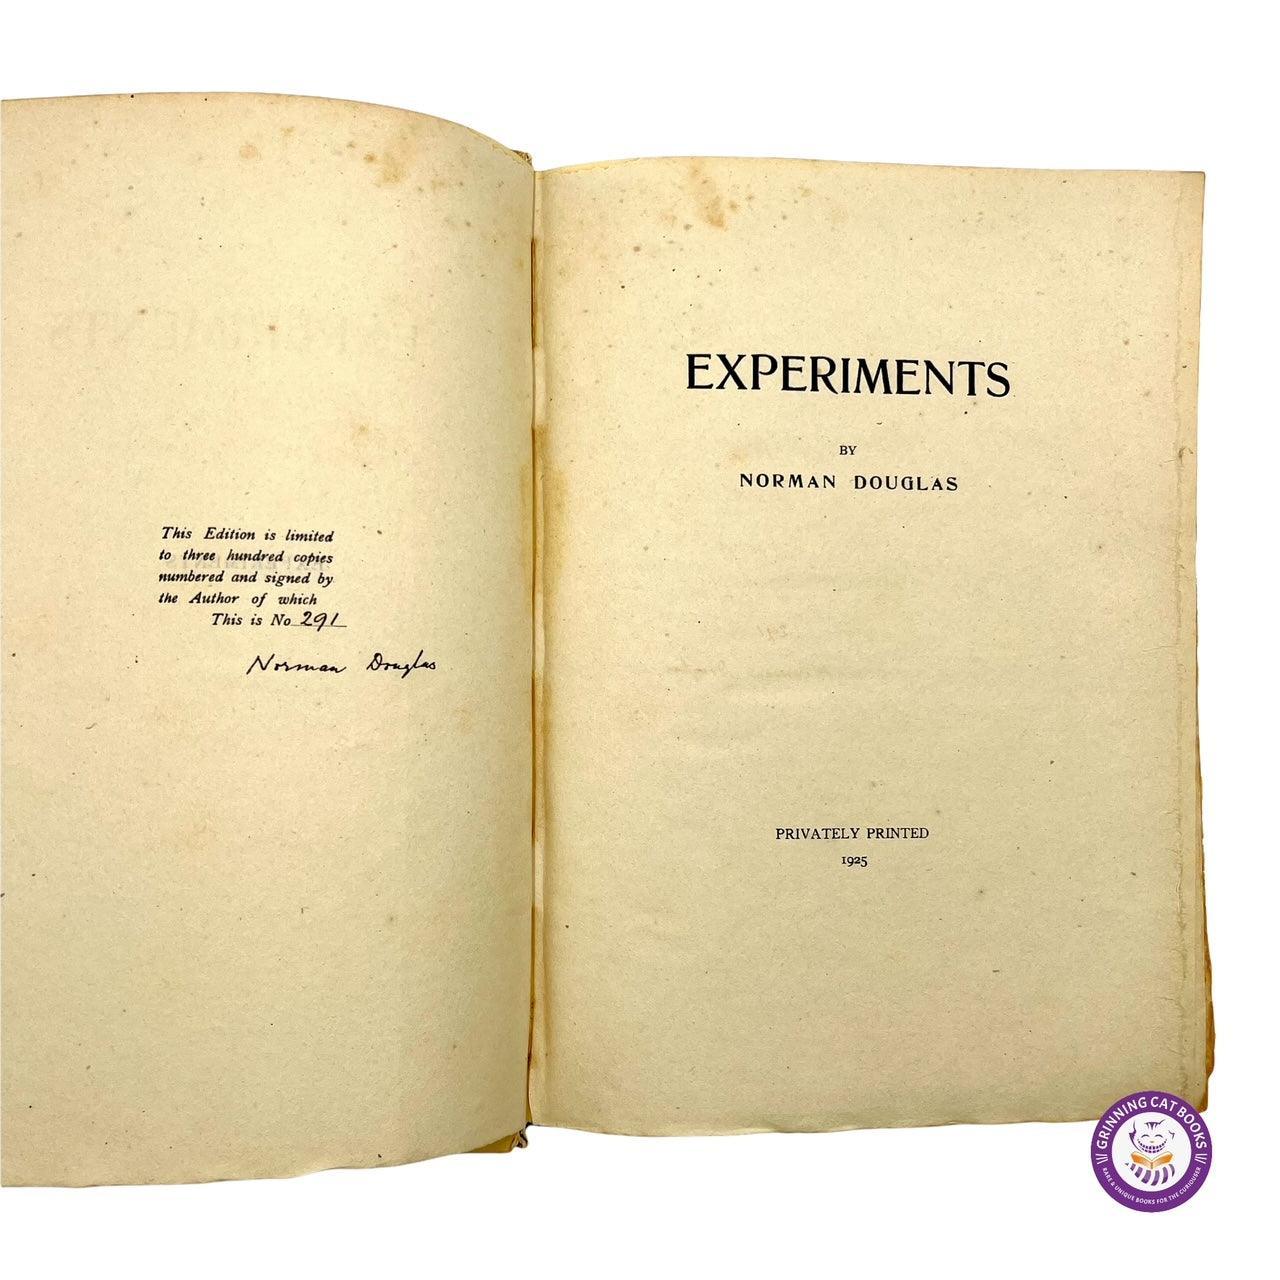 Experiments (signed by Norman Douglas) - Grinning Cat Books - SCIENCE - SIGNED